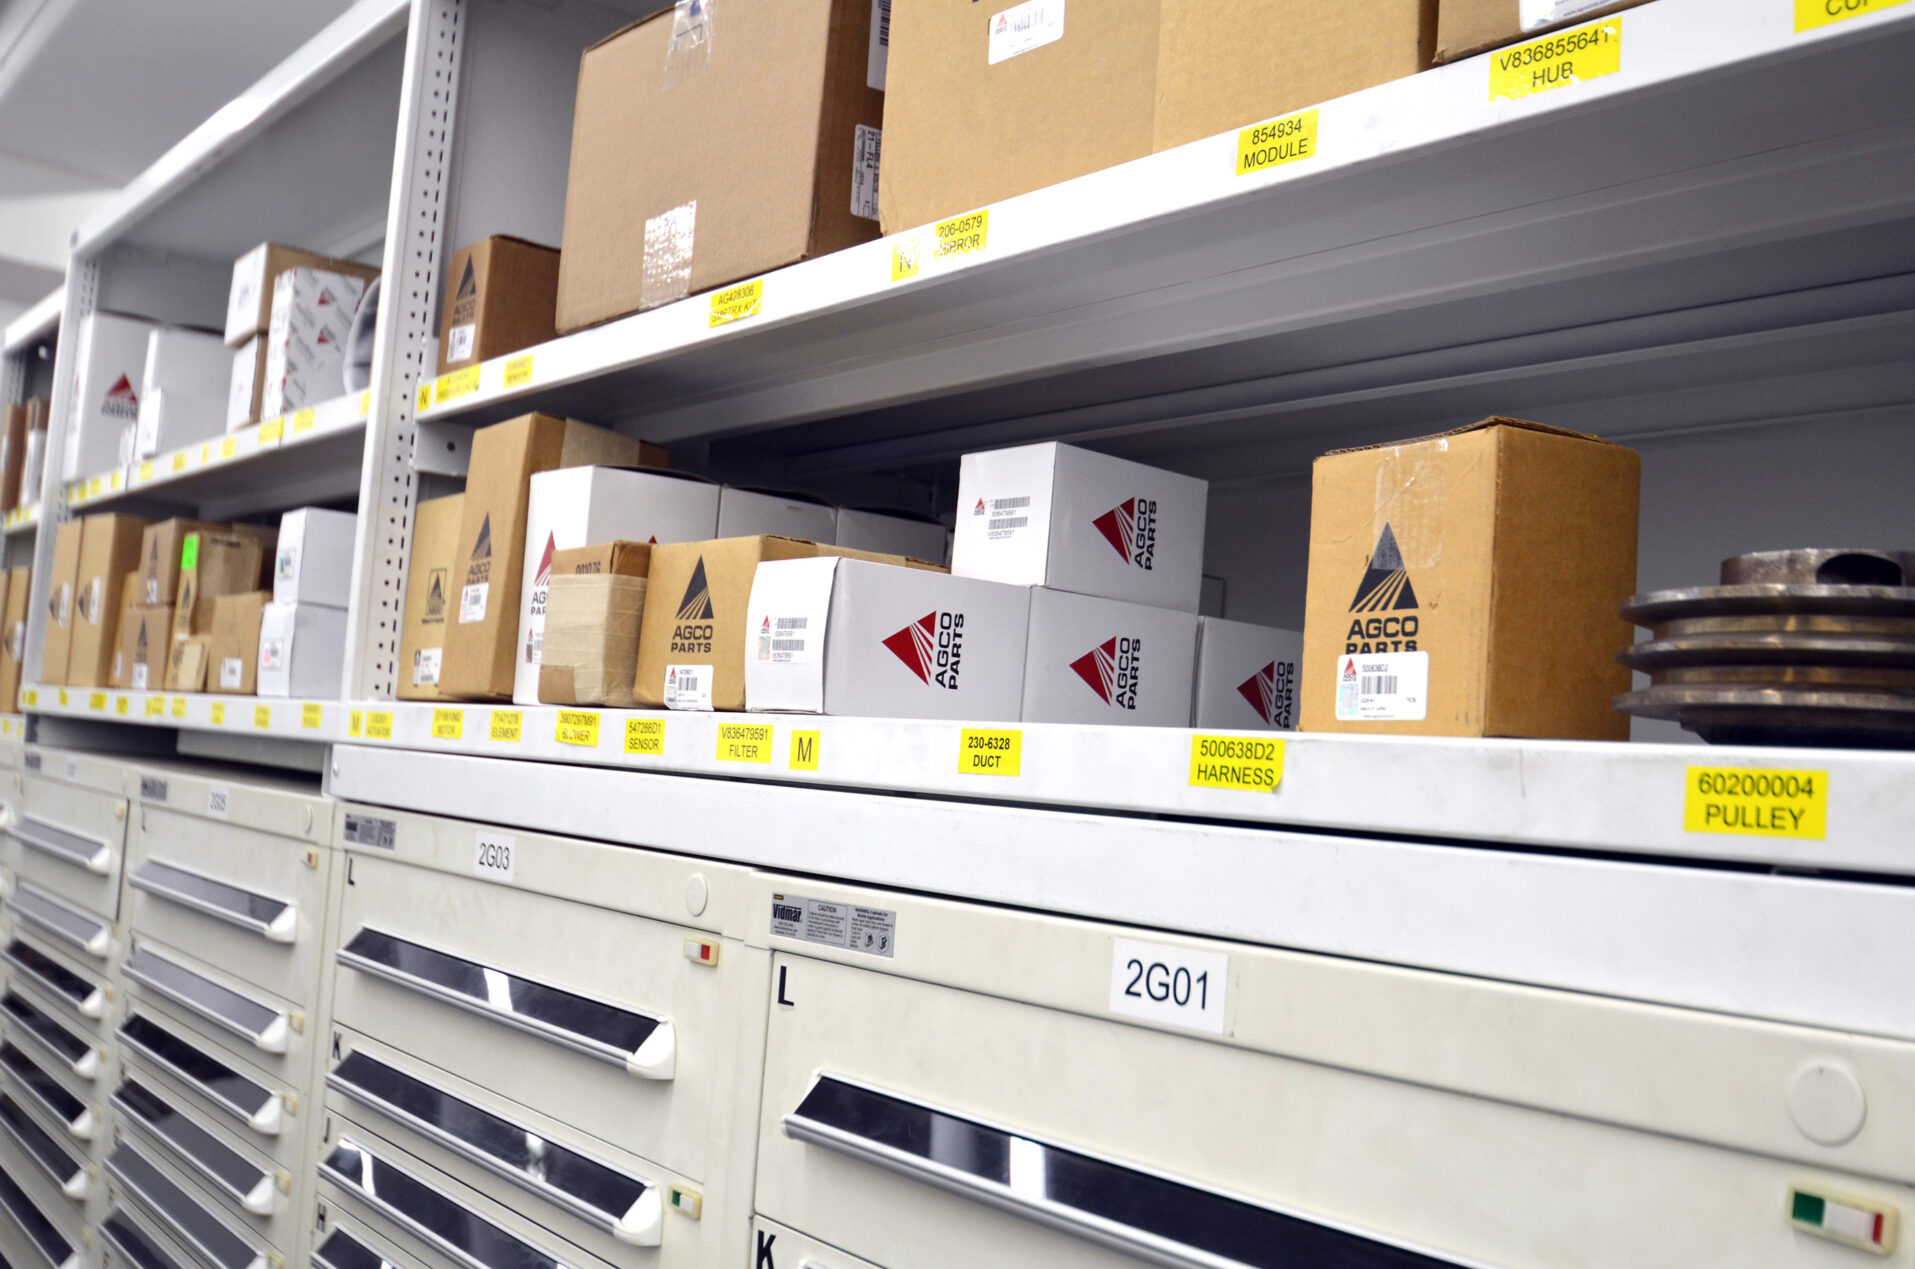 Shelves of AGCO parts in boxes